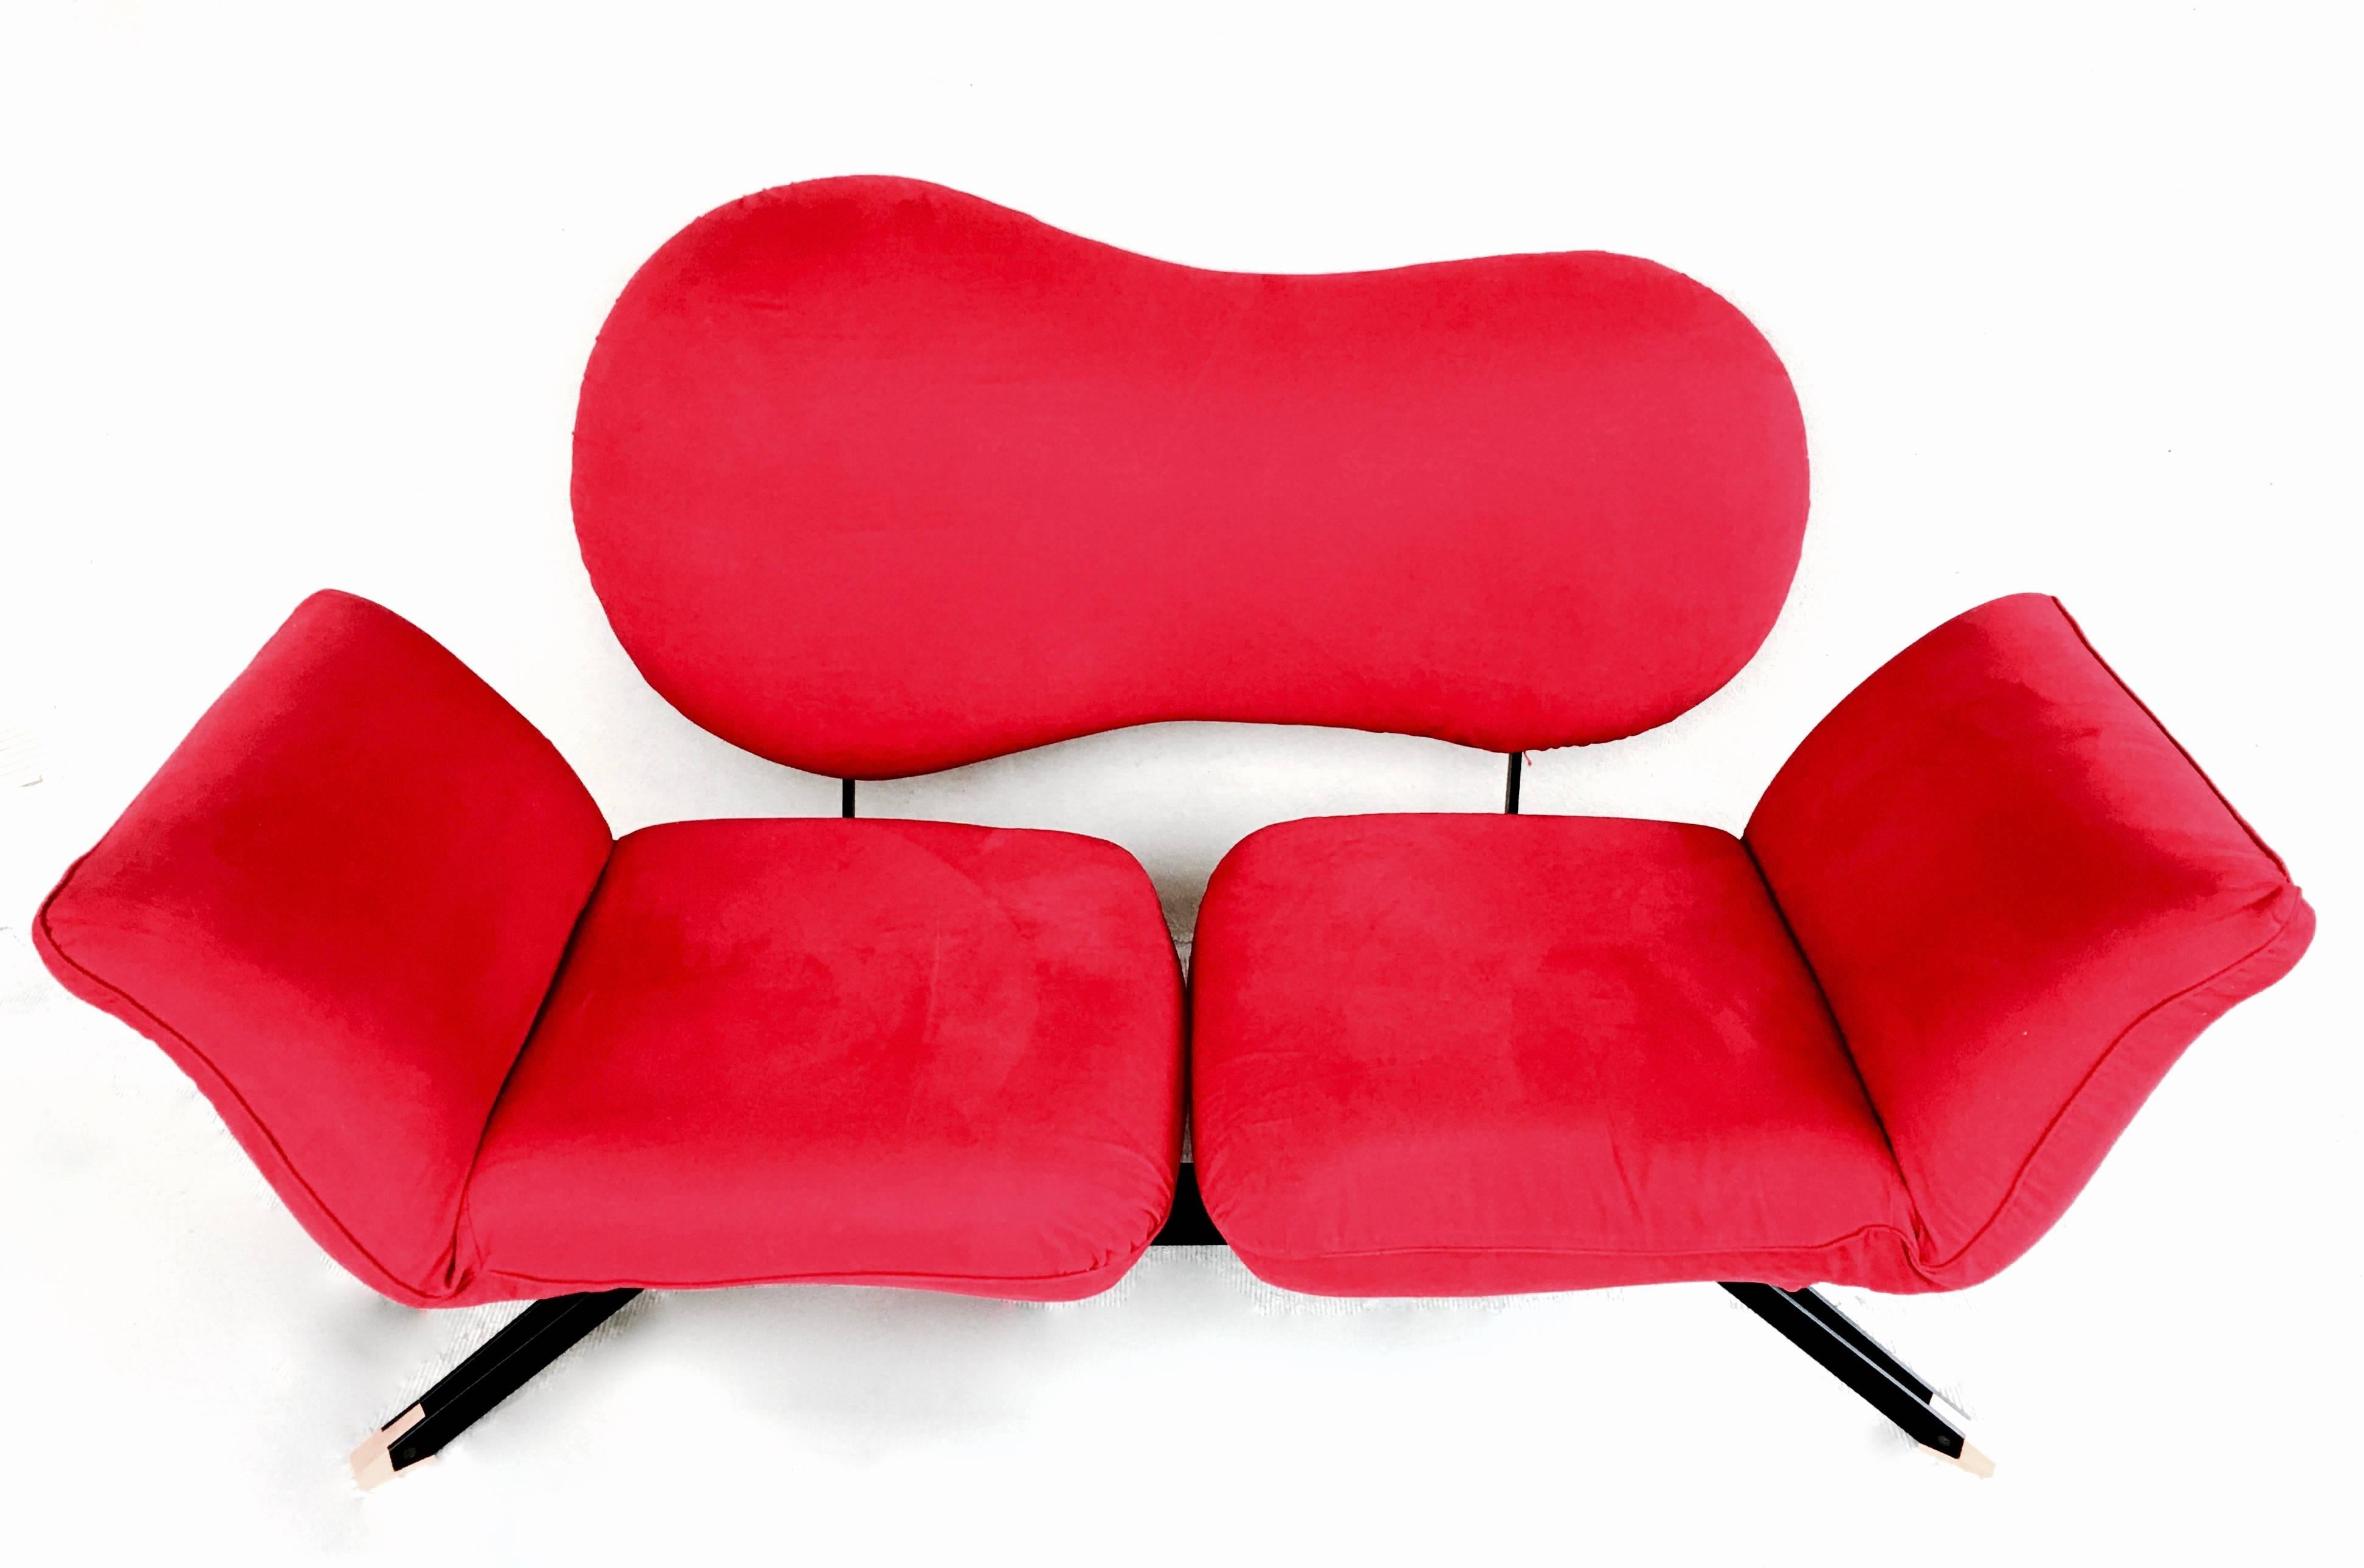 Sculptural Postmodern sofa of Italian manufacture circa 1989. Organic shaped backrest and flexible seat and armrests in bright red. Set on a black enamelled frame with beechwood feet. Excellent details such as the open framed feet and the open